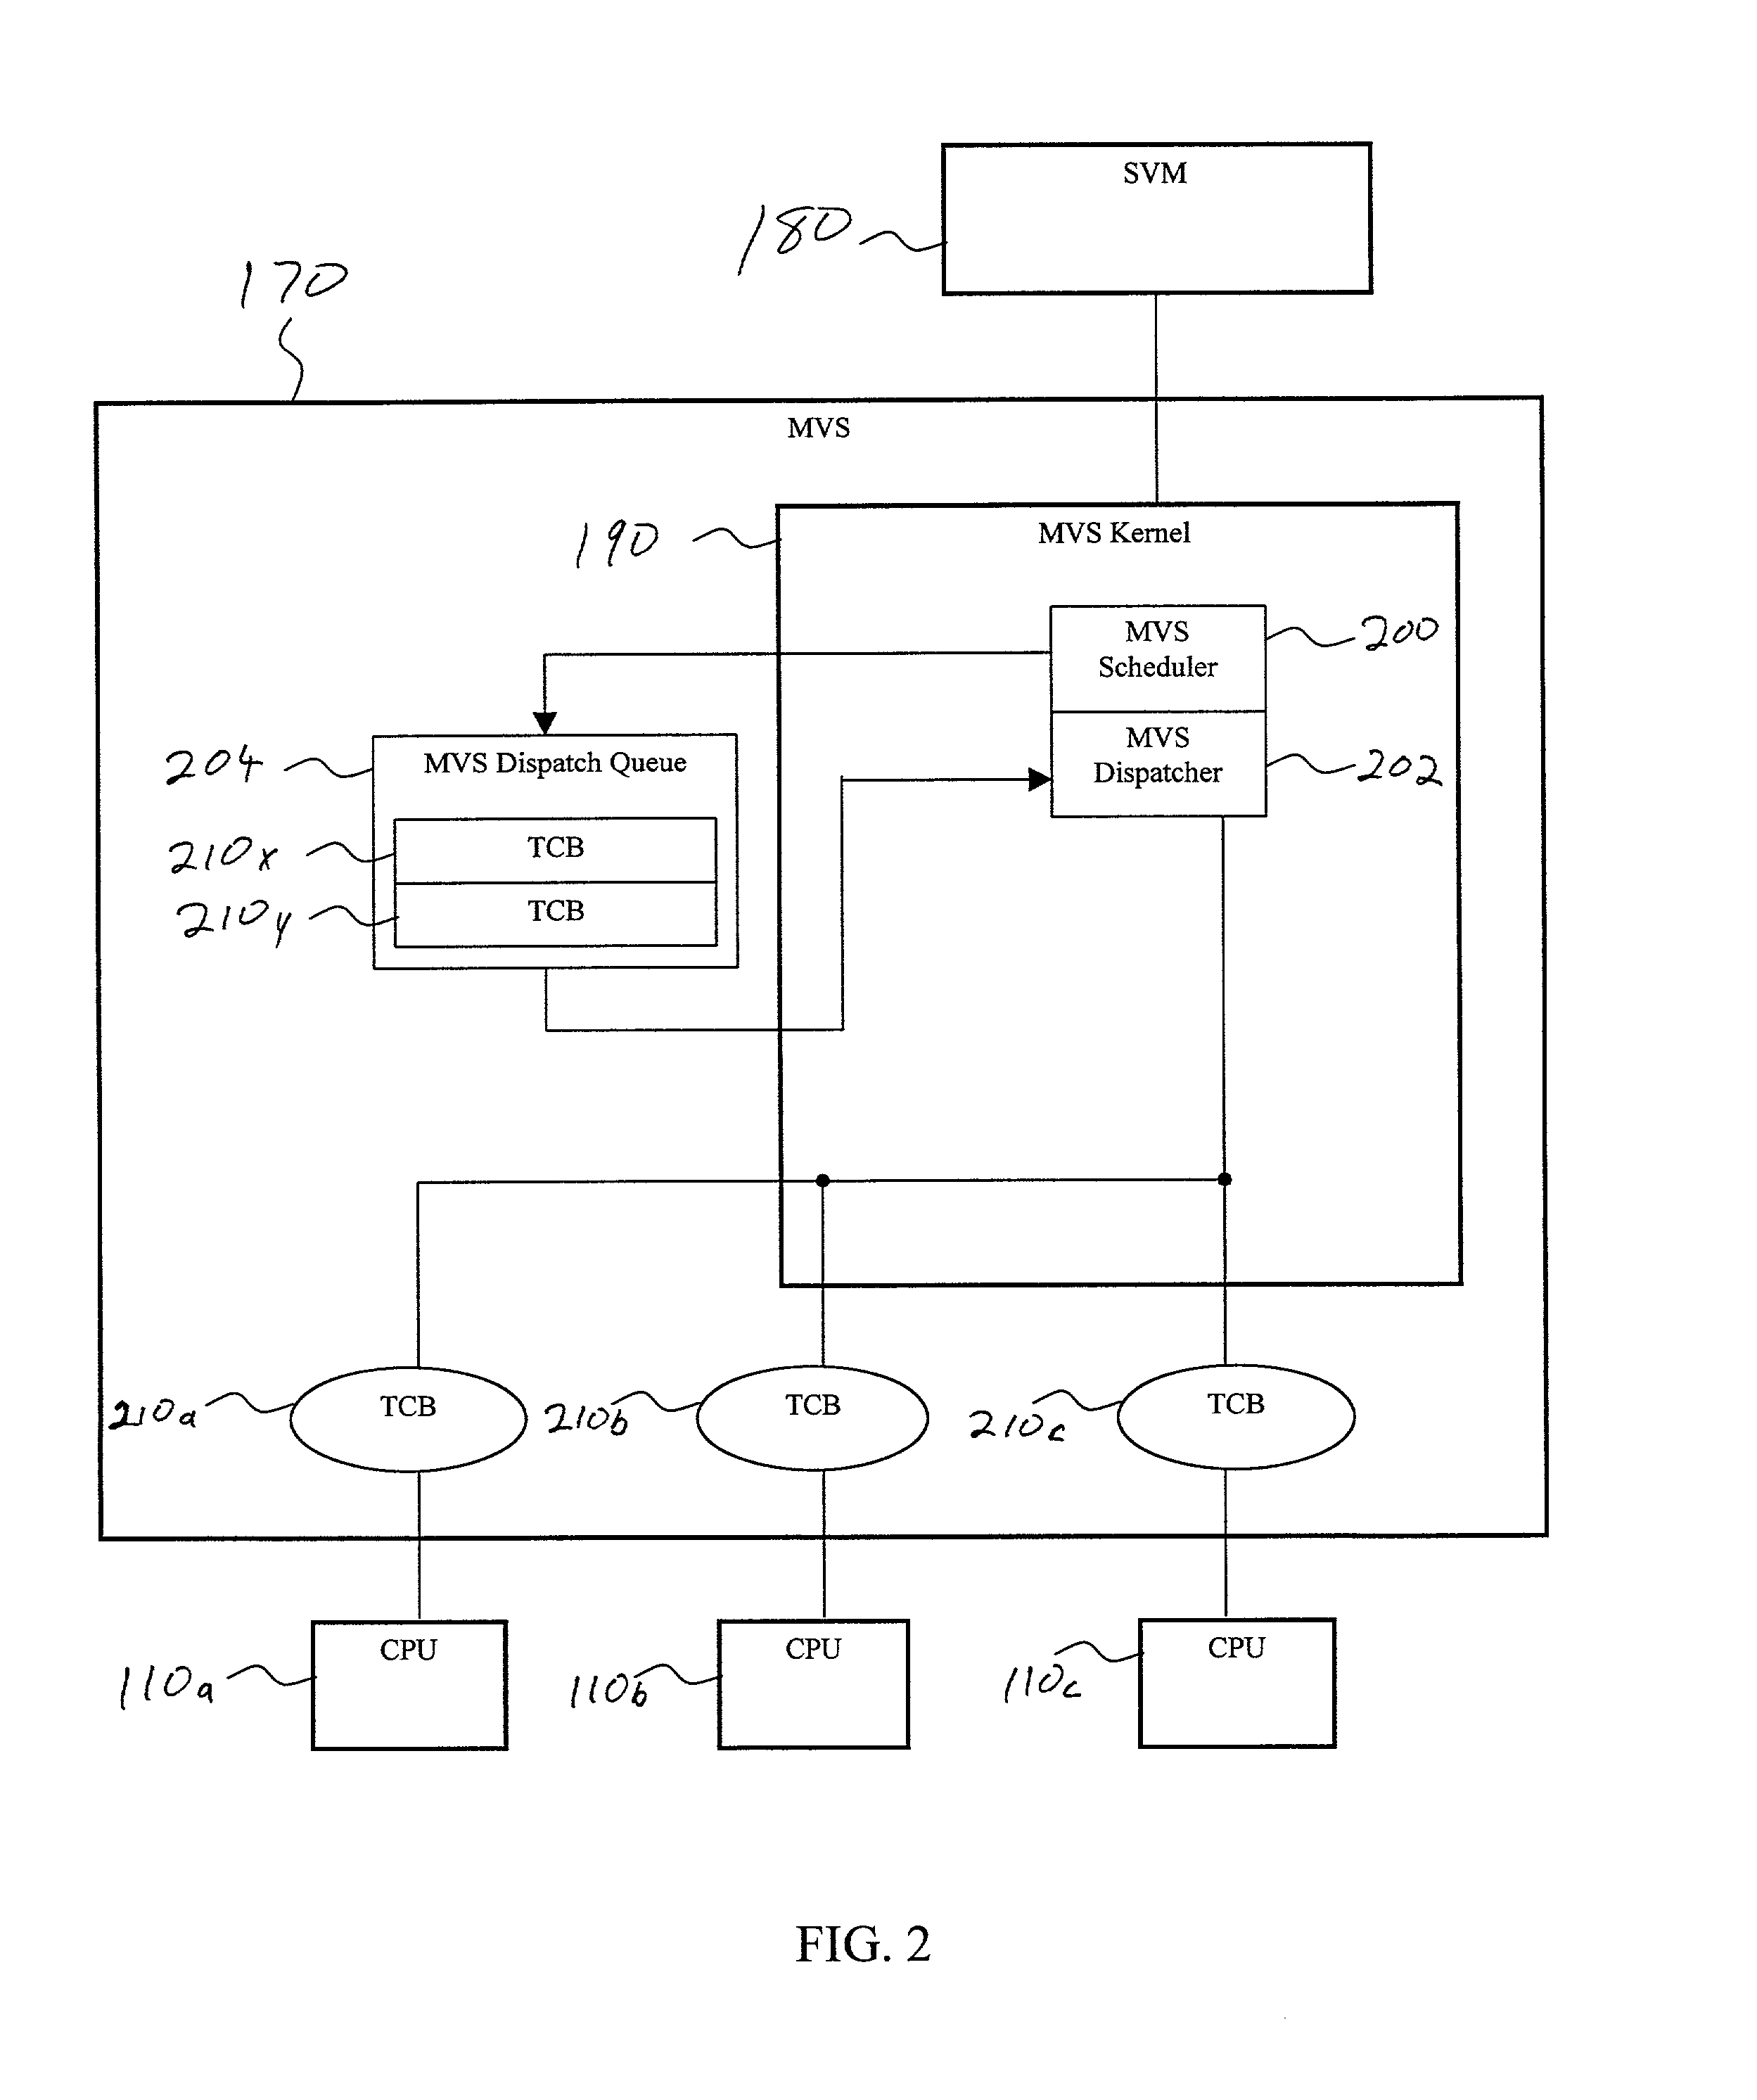 System and method for utilizing dispatch queues in a multiprocessor data processing system